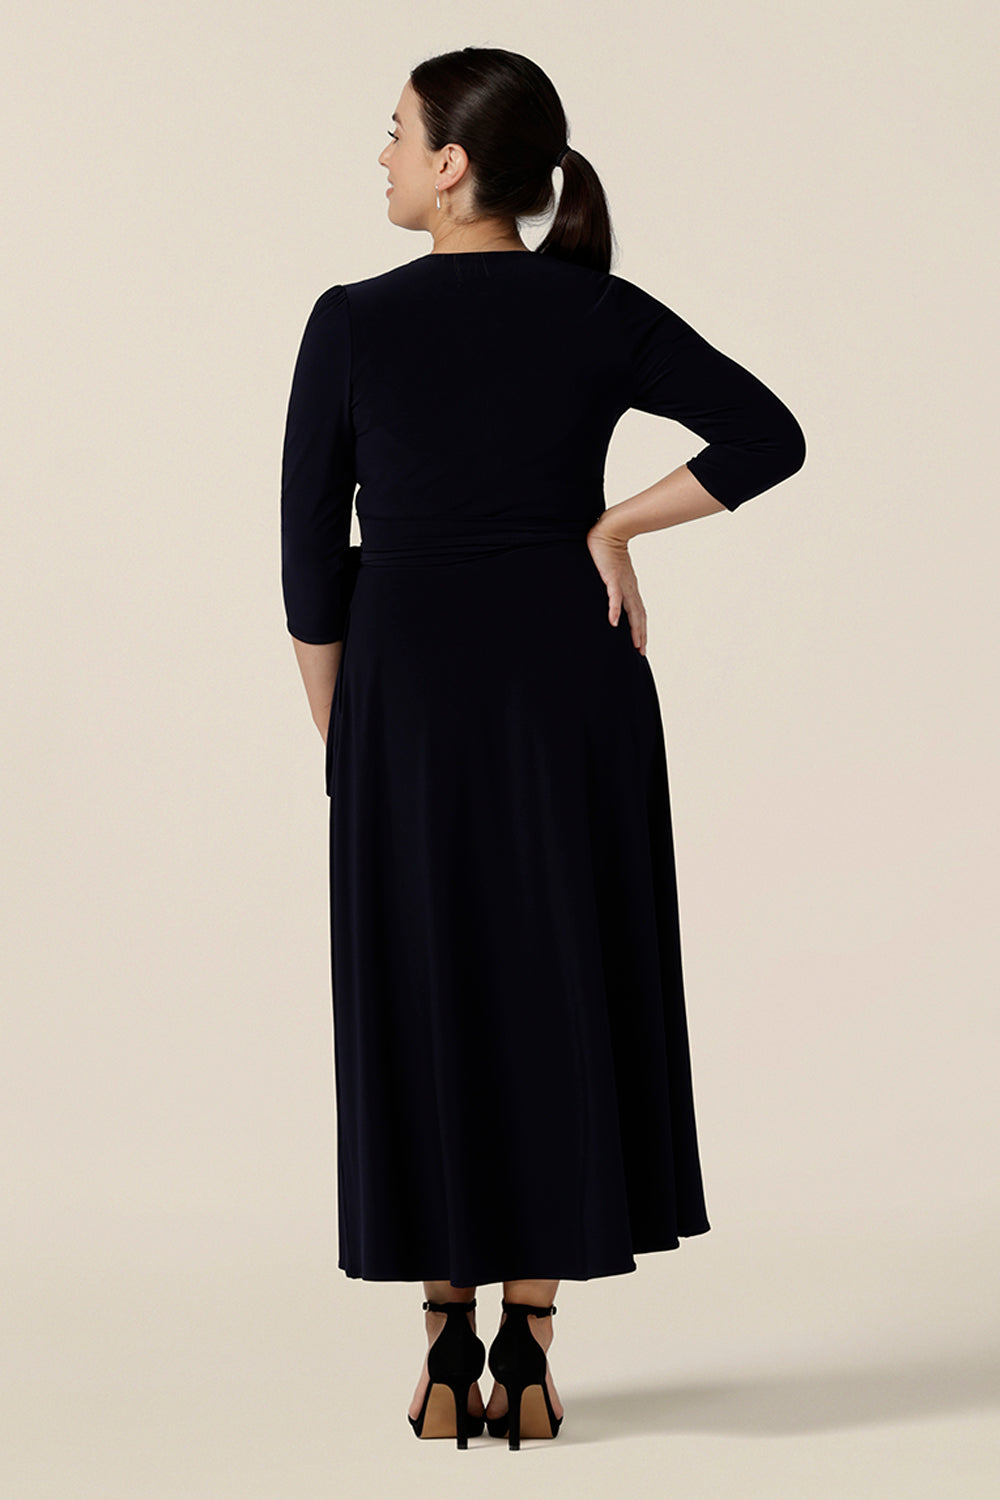 Shown for petite height women, this is the back view of a navy blue wrap dress with 3/4 sleeves. With a full, midi skirt, this jersey dress is a good dress for evening and occasion wear. Made in Australia, shop dresses in sizes 8 to 24.